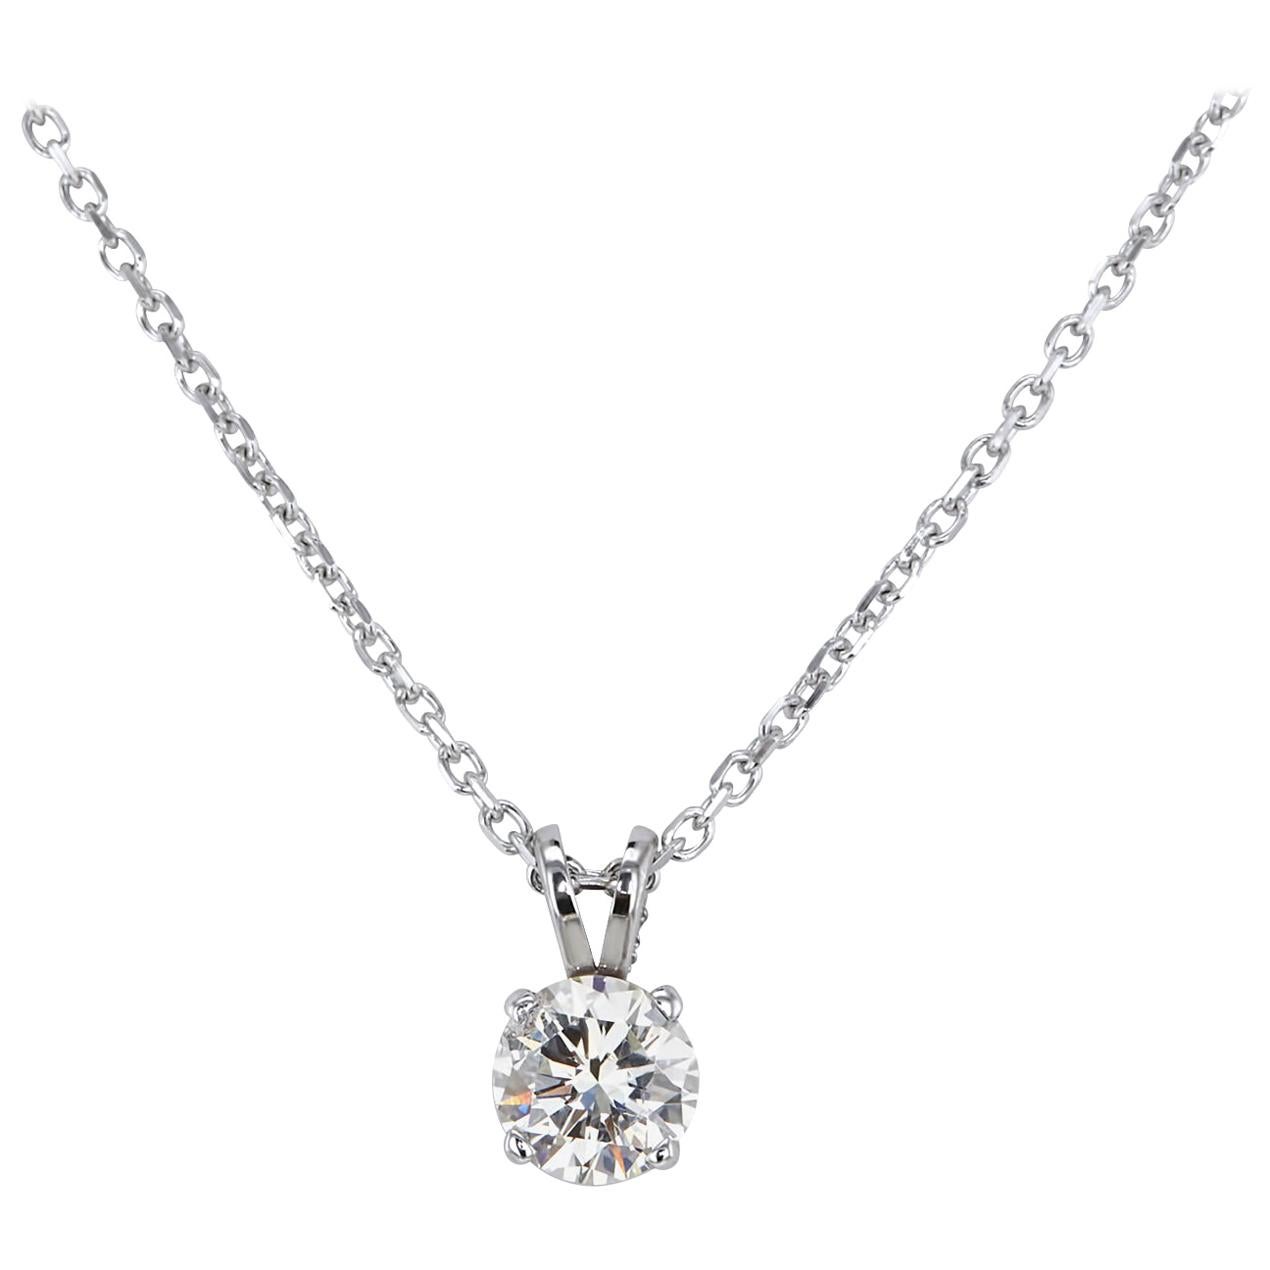 Certified 0.62 Carat Round Diamond Solitaire Pendant & Necklace in 14K Gold For Sale